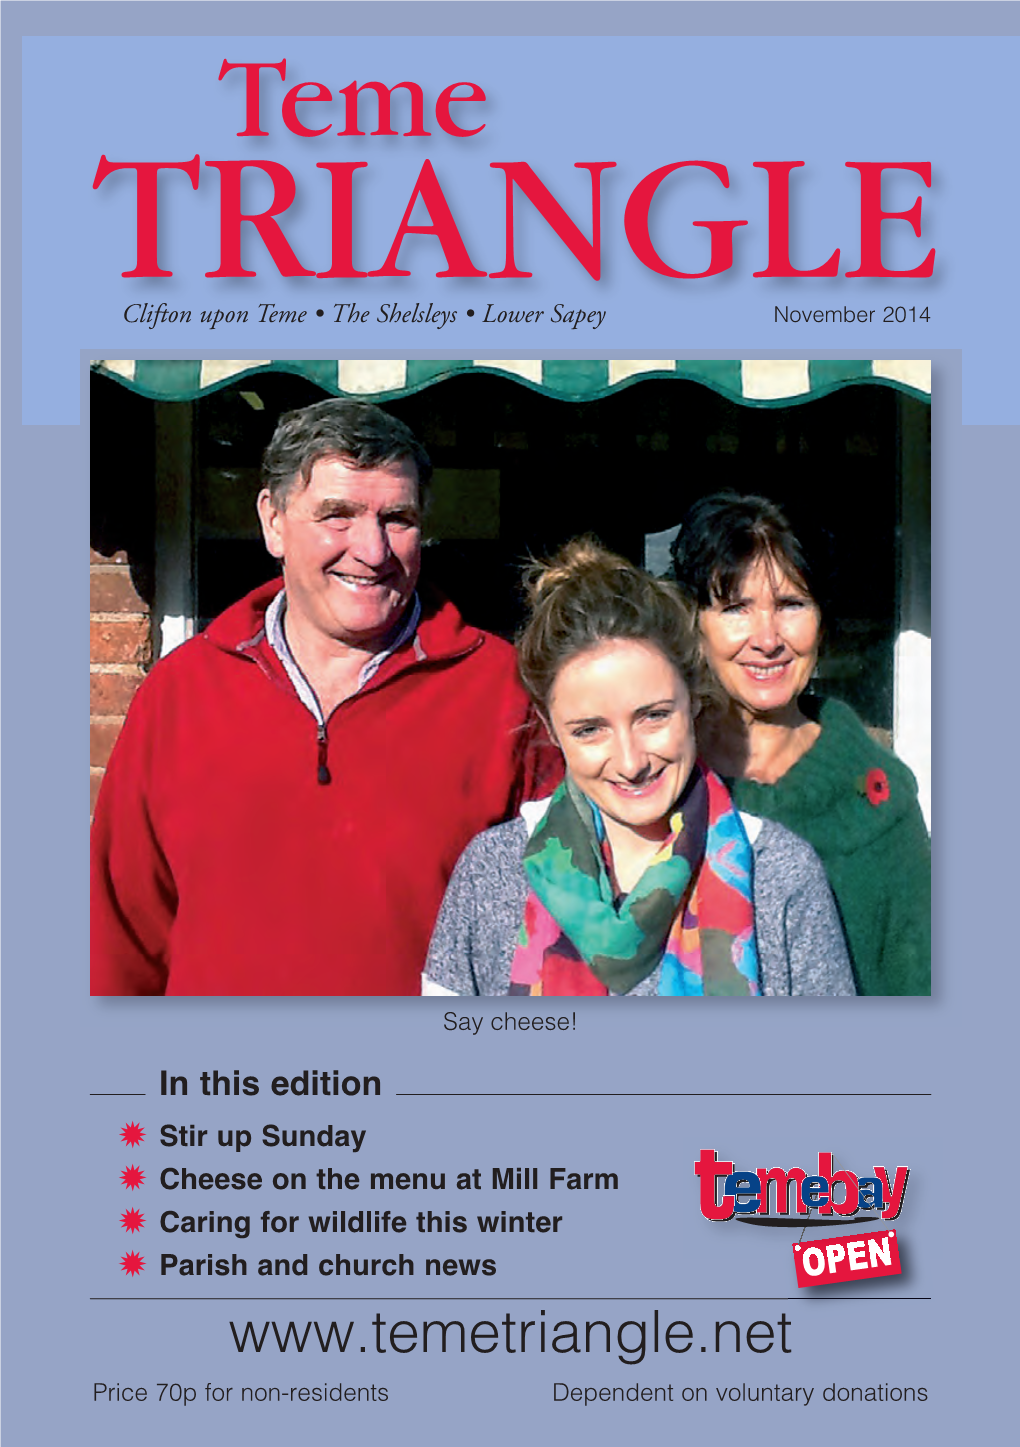 November 2014 Triangle April 04.Qxd 30/10/2014 09:02 Page 1 Teme TRIANGLE Clifton Upon Teme • the Shelsleys • Lower Sapey November 2014